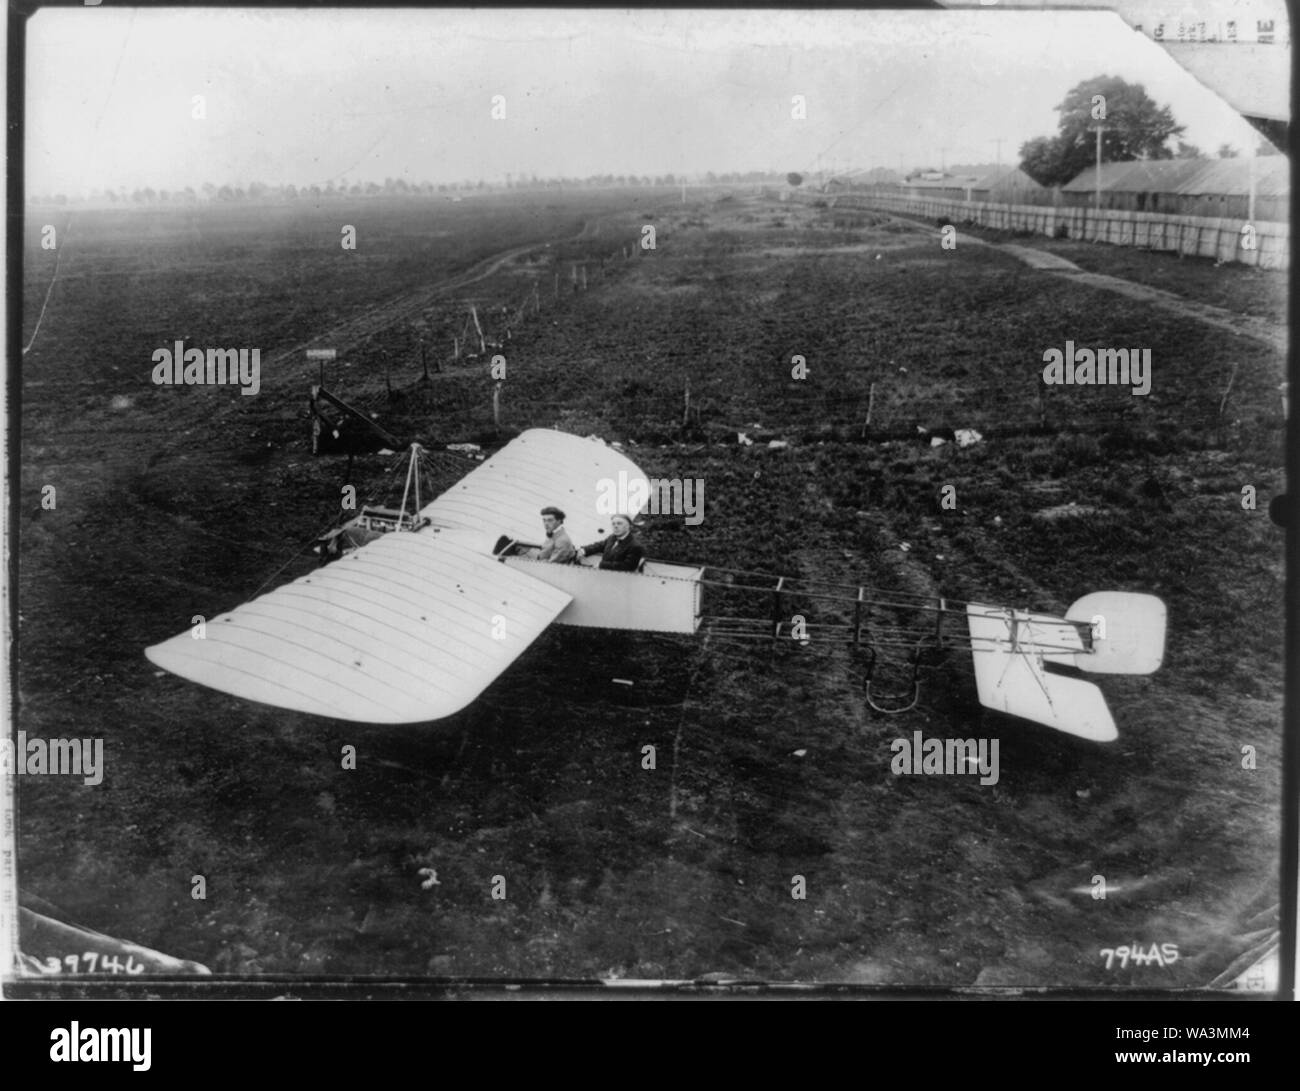 Bleriot type airplane of American airplane supply co. [i.e., American Aeroplane Supply House?], Garden City, L.I., May 1912 Stock Photo